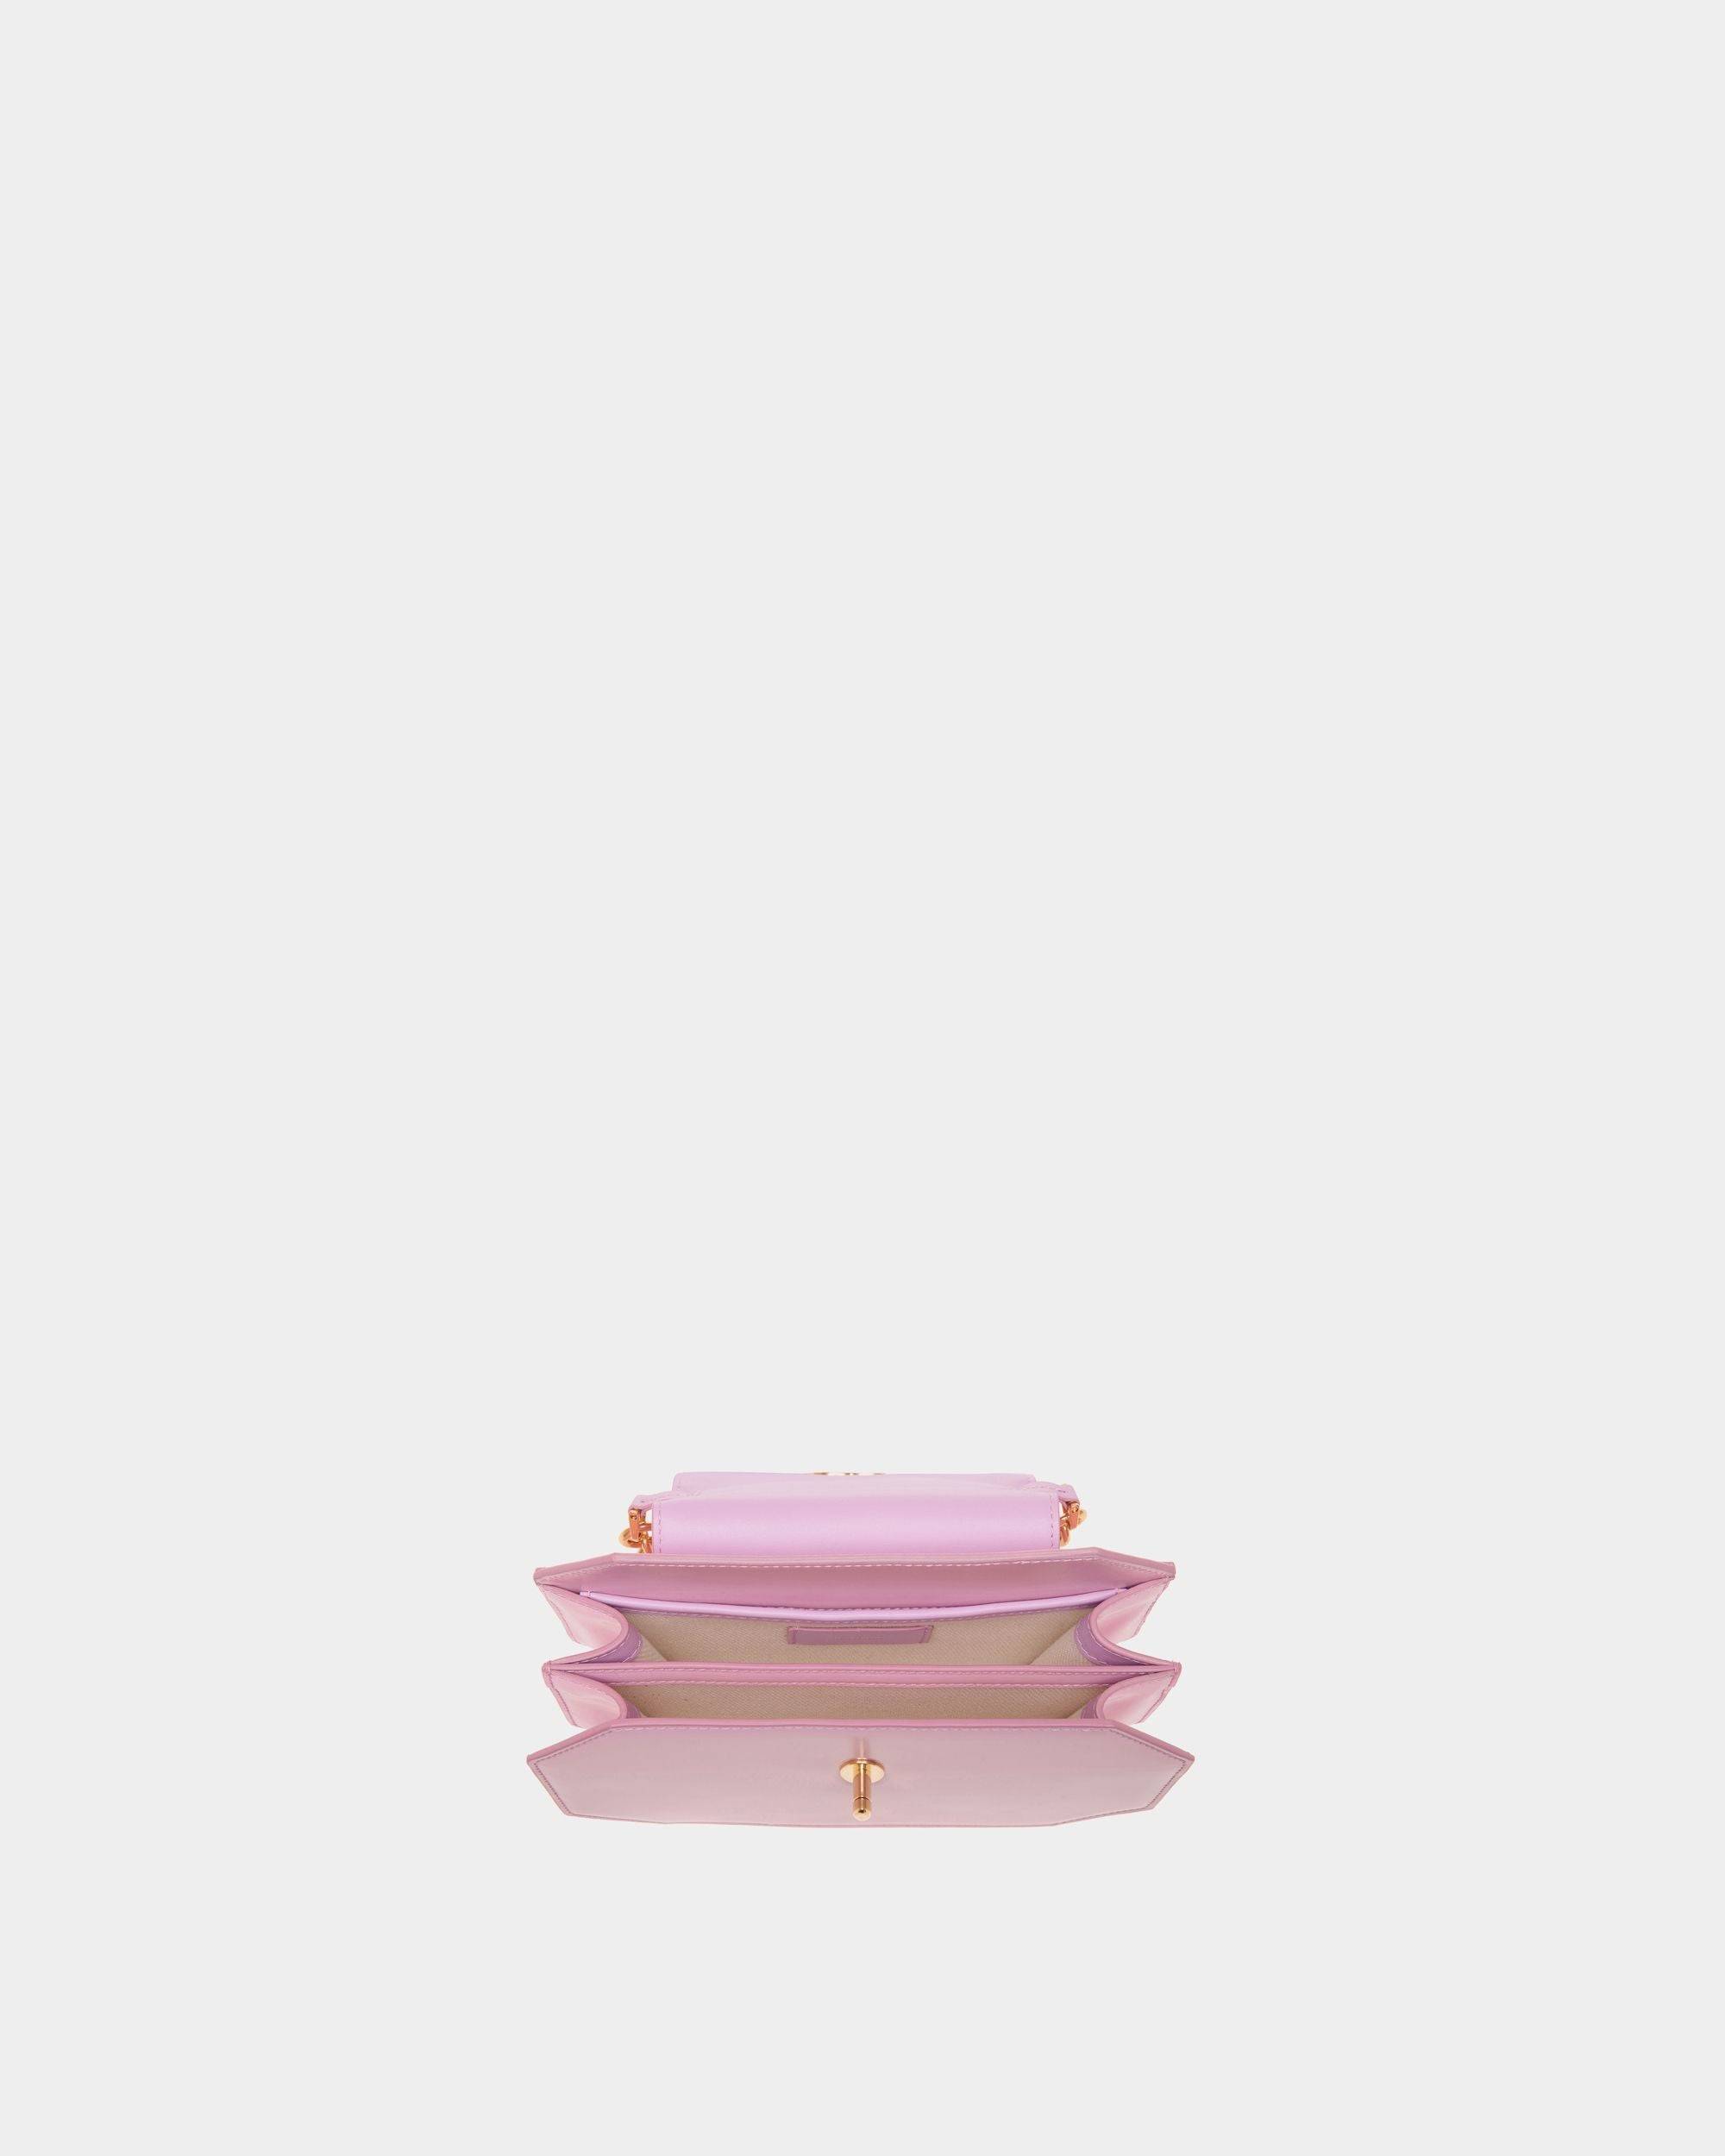 Emblem | Women's Mini Bag in Pink Brushed Leather | Bally | Still Life Open / Inside